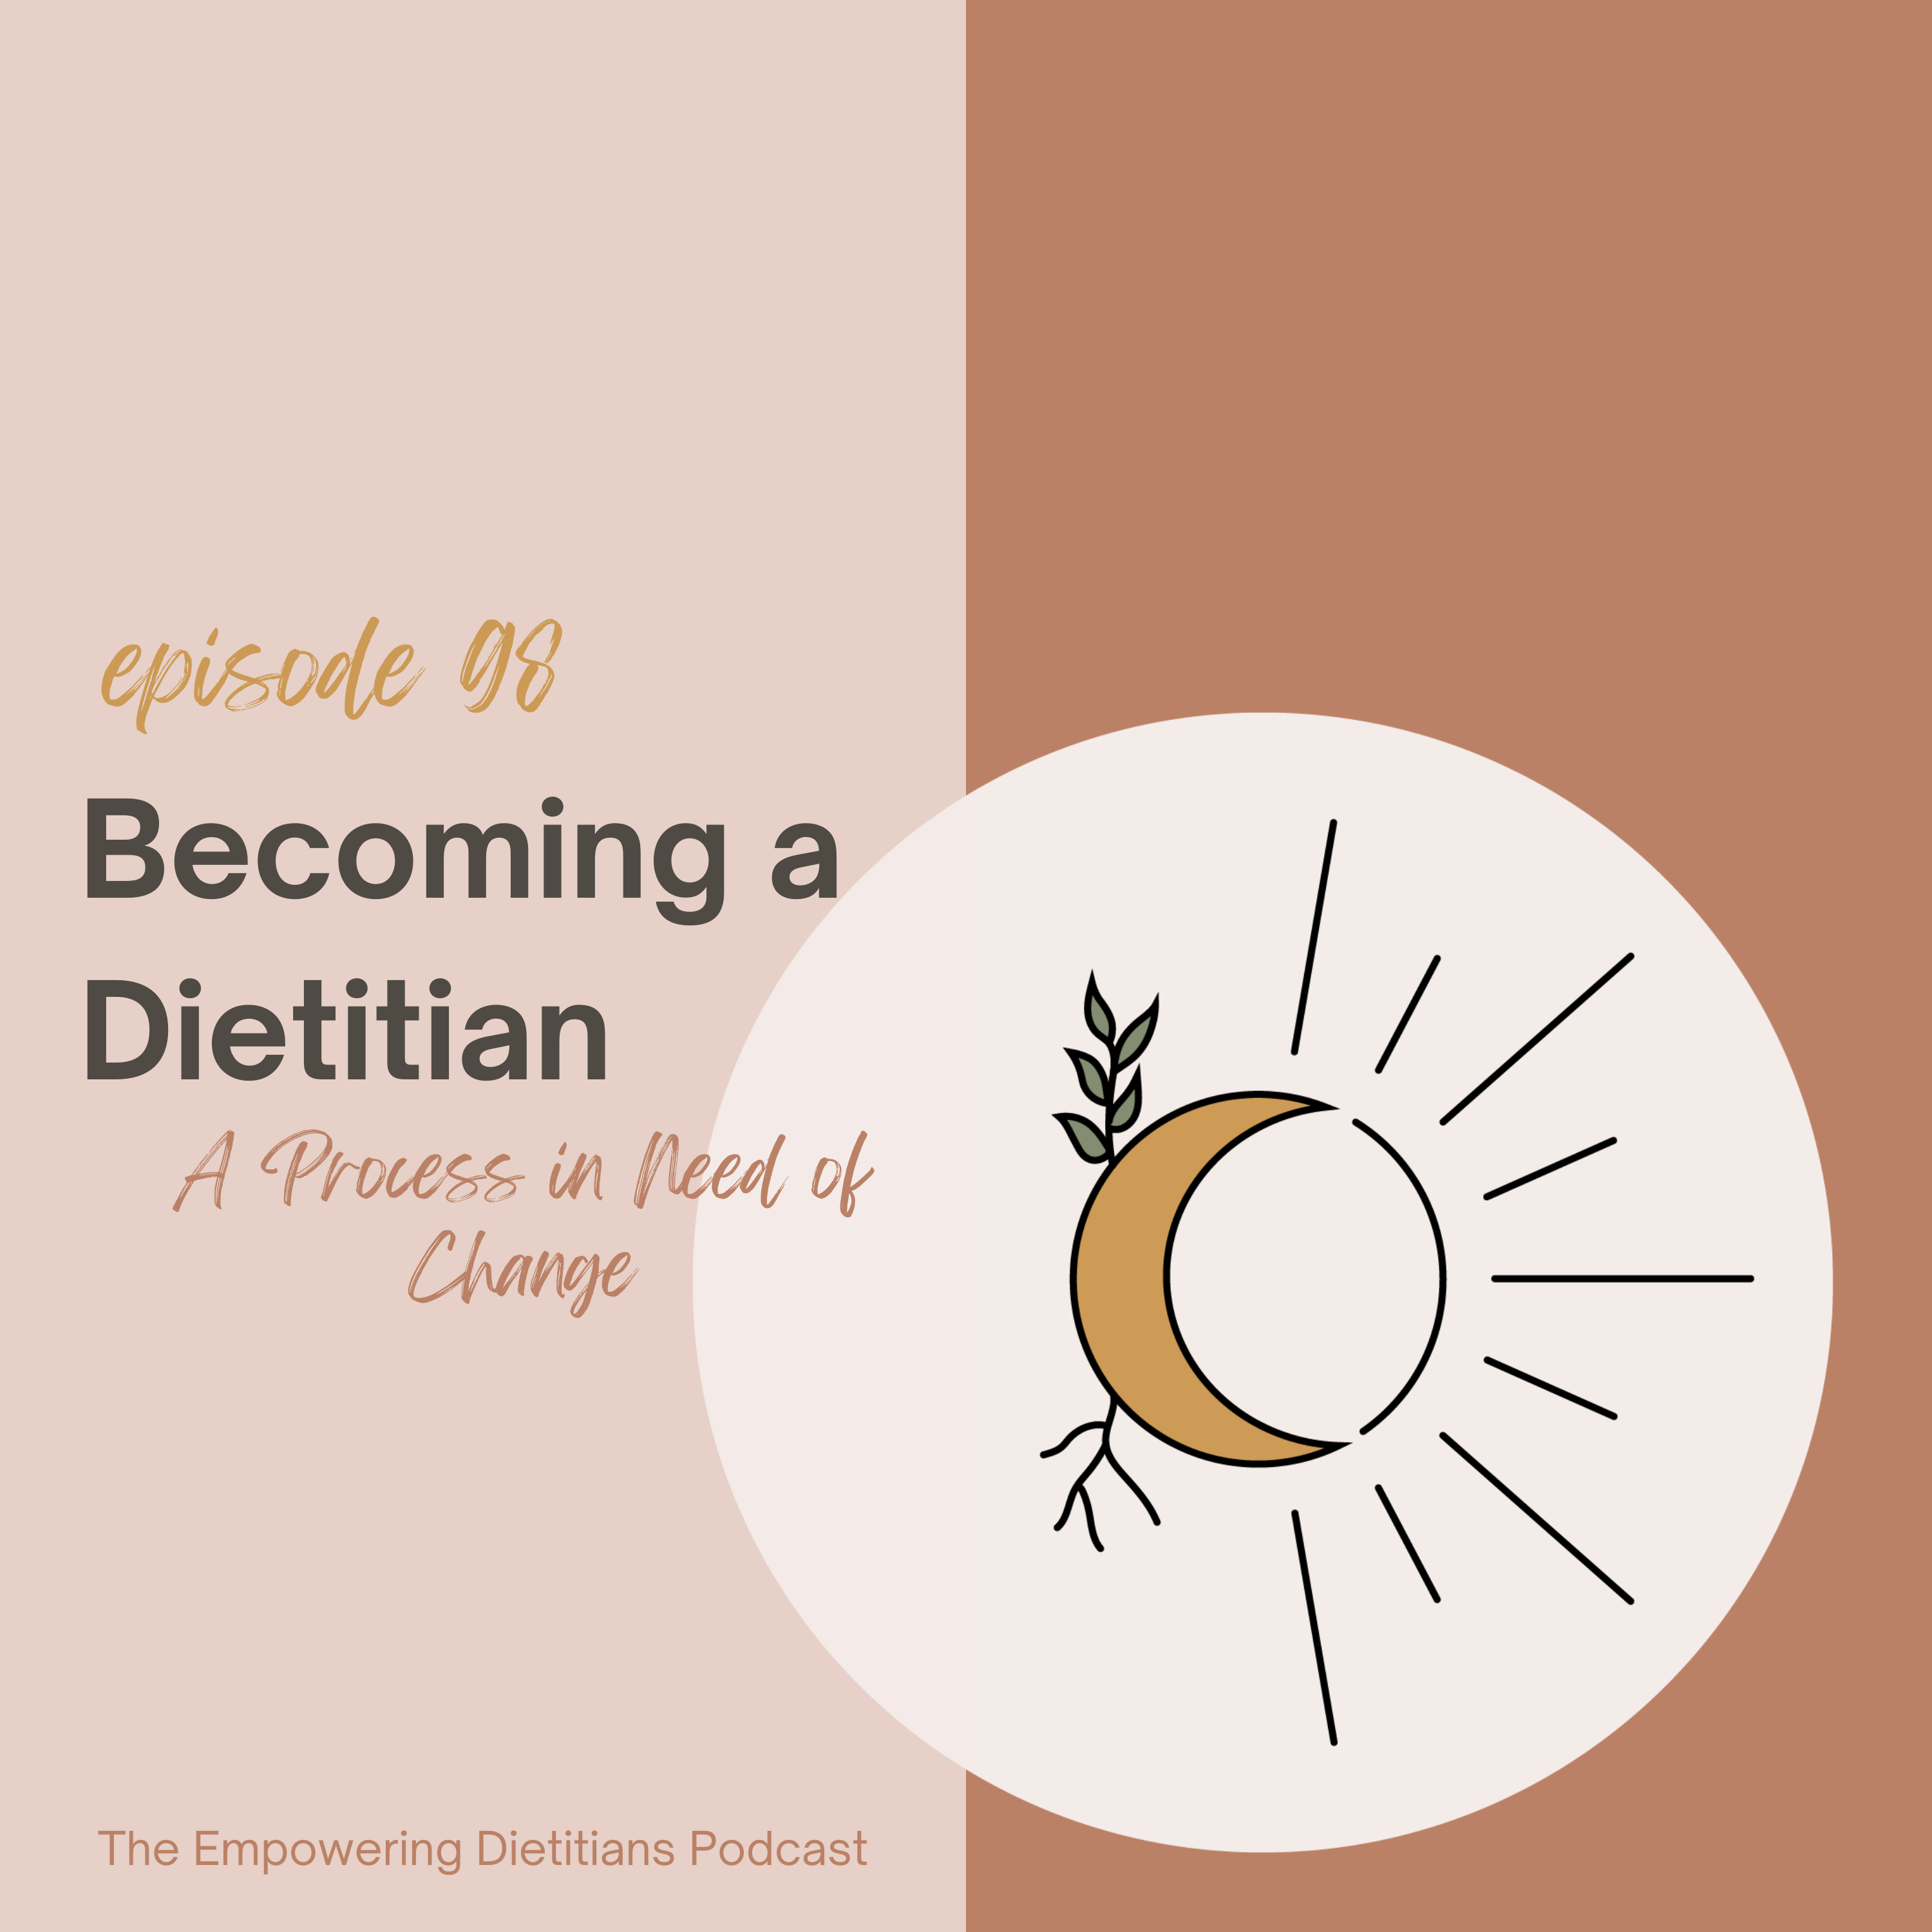 becoming a dietitian - a process in need of chang